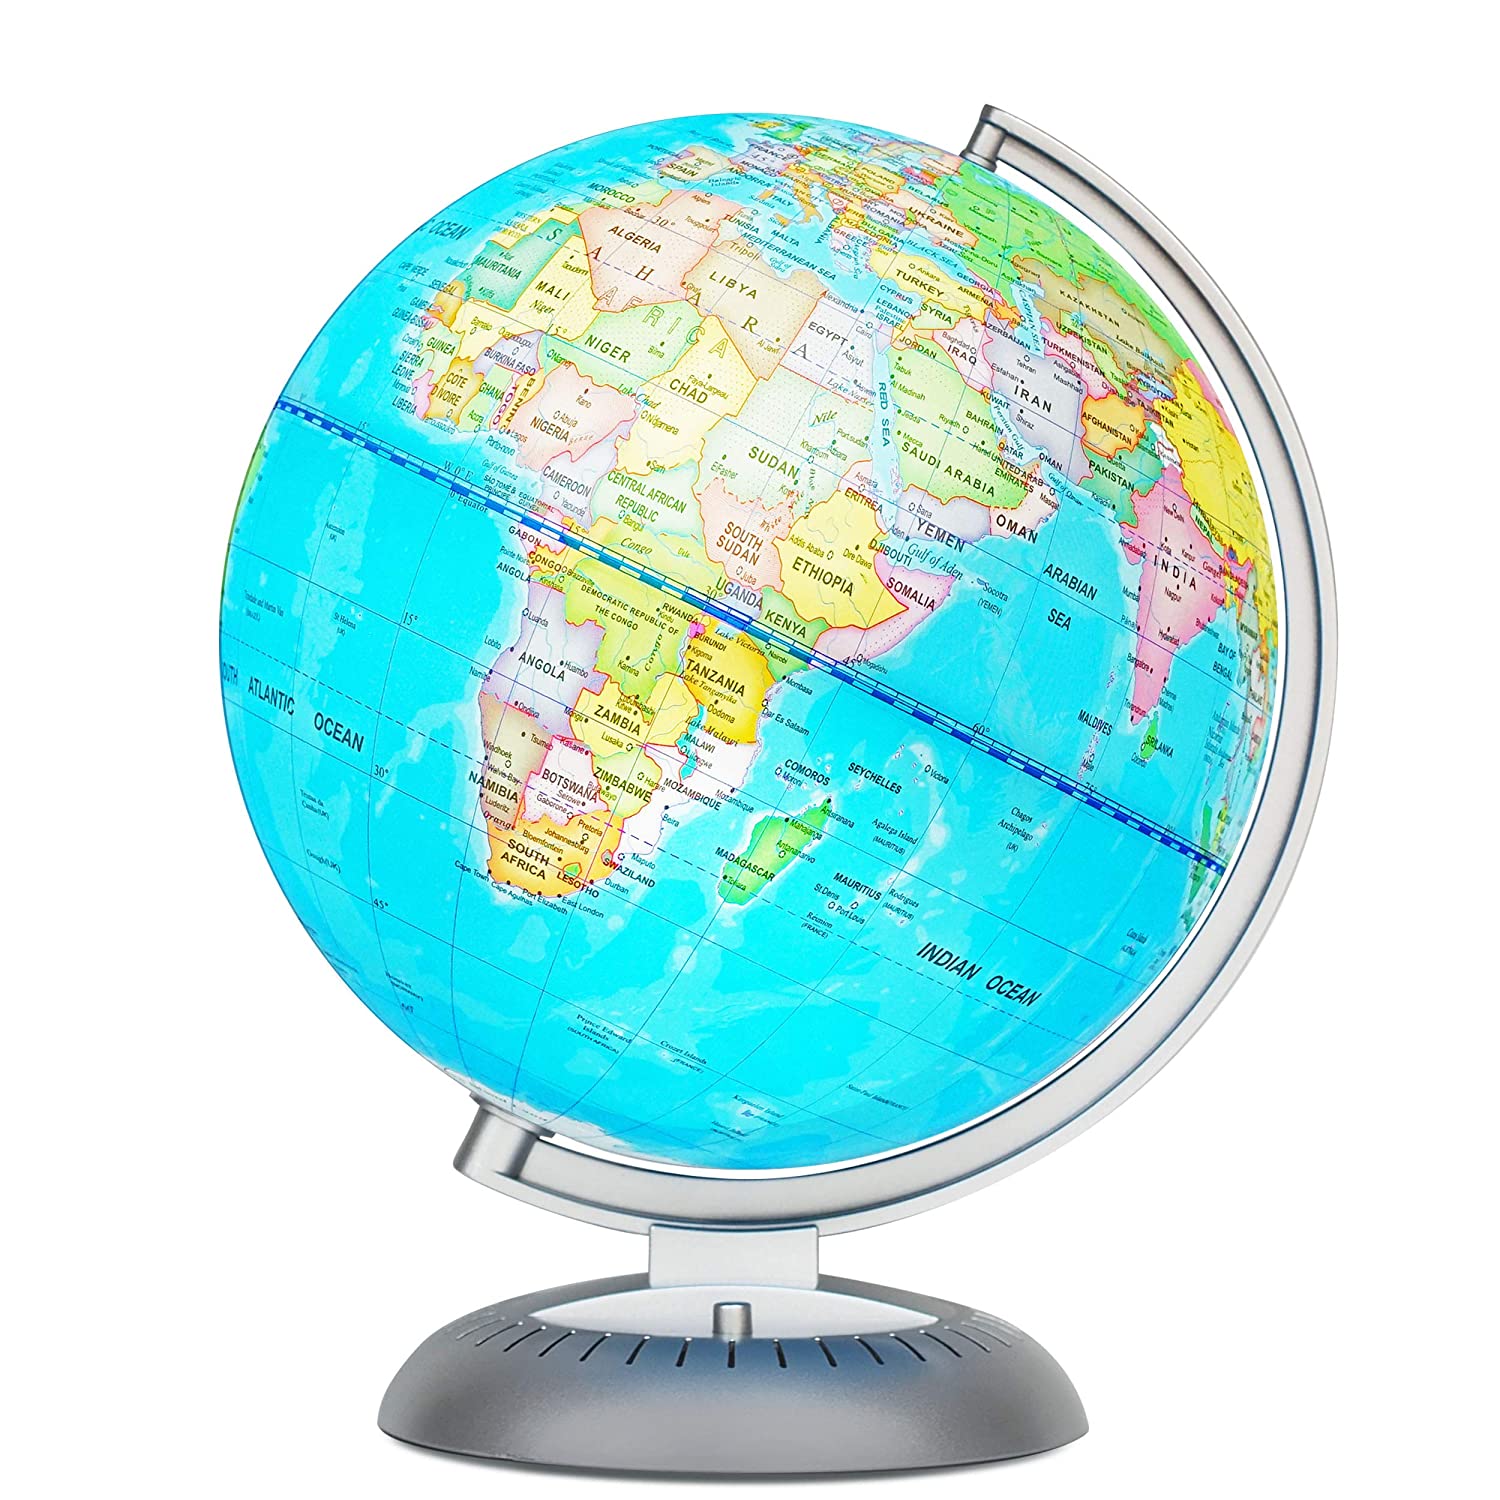 Illuminated World Globe for Kids with Stand – Built-in LED Light Illuminates for Night View